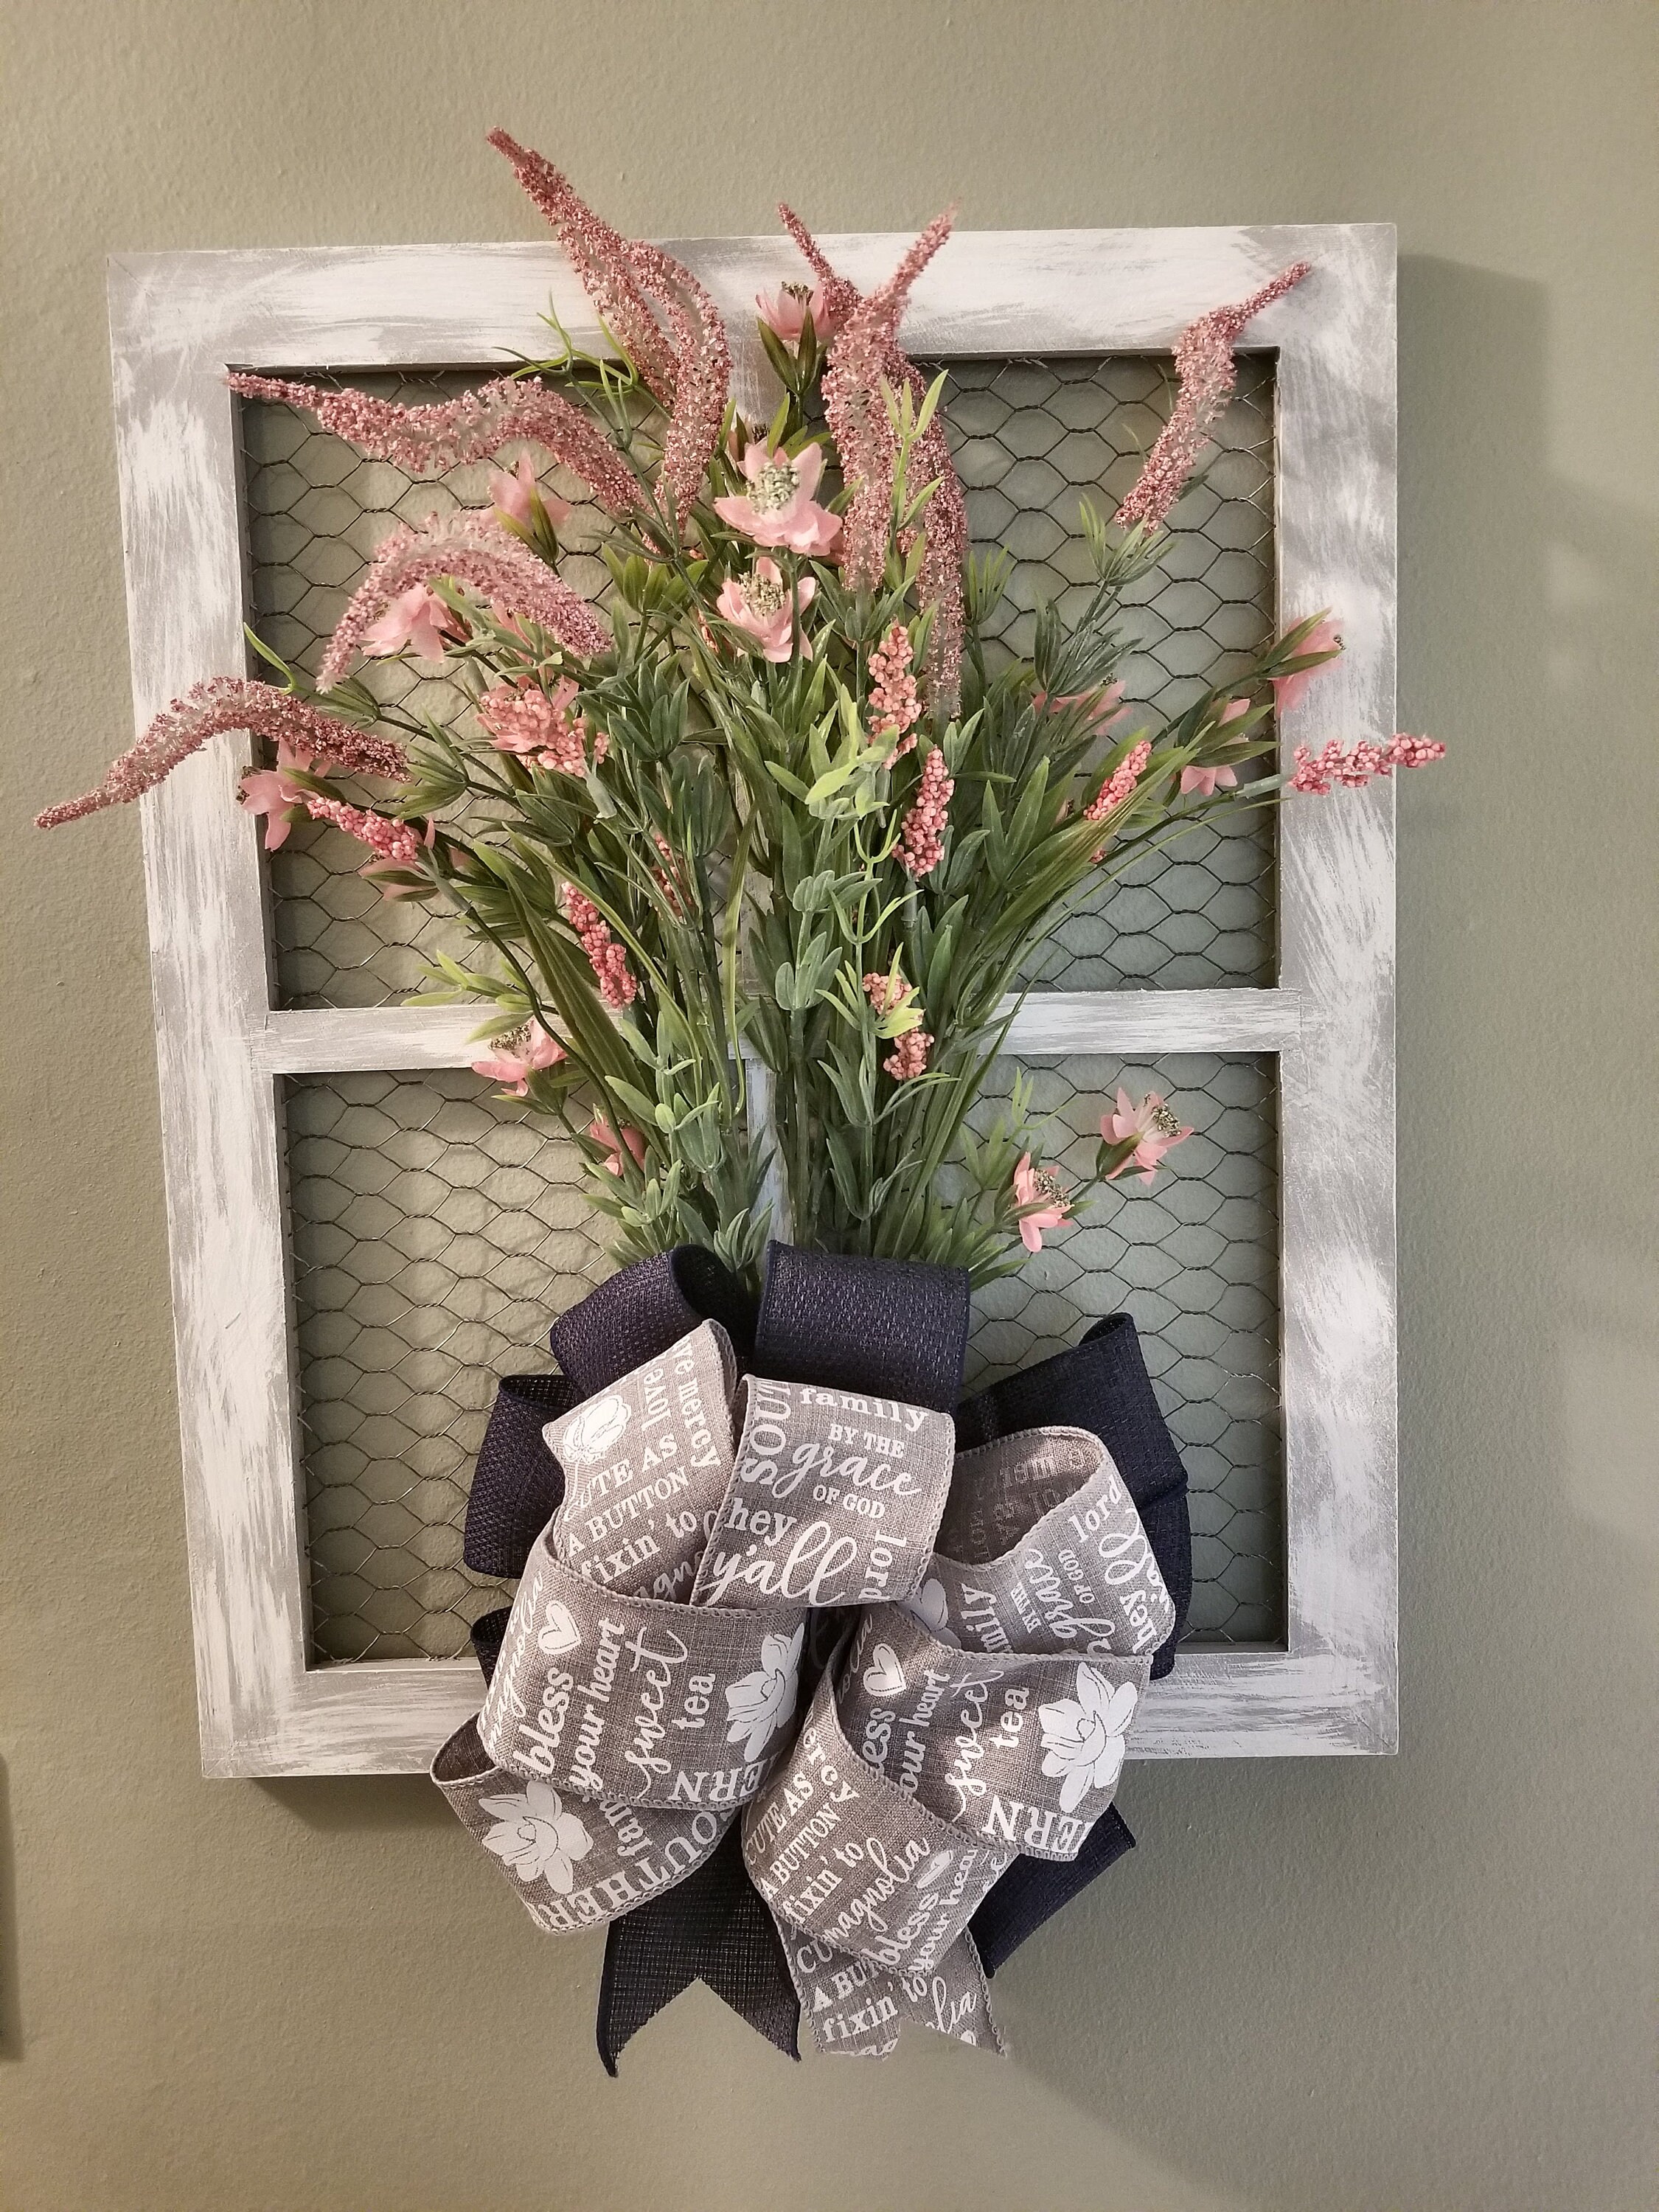 Window Frame With Lambs Ear Wreath, Chicken Wire Frame, Farmhouse Wall  Decor, Countrydecor,rustic Wall Decor, Gallery Wall Decor 